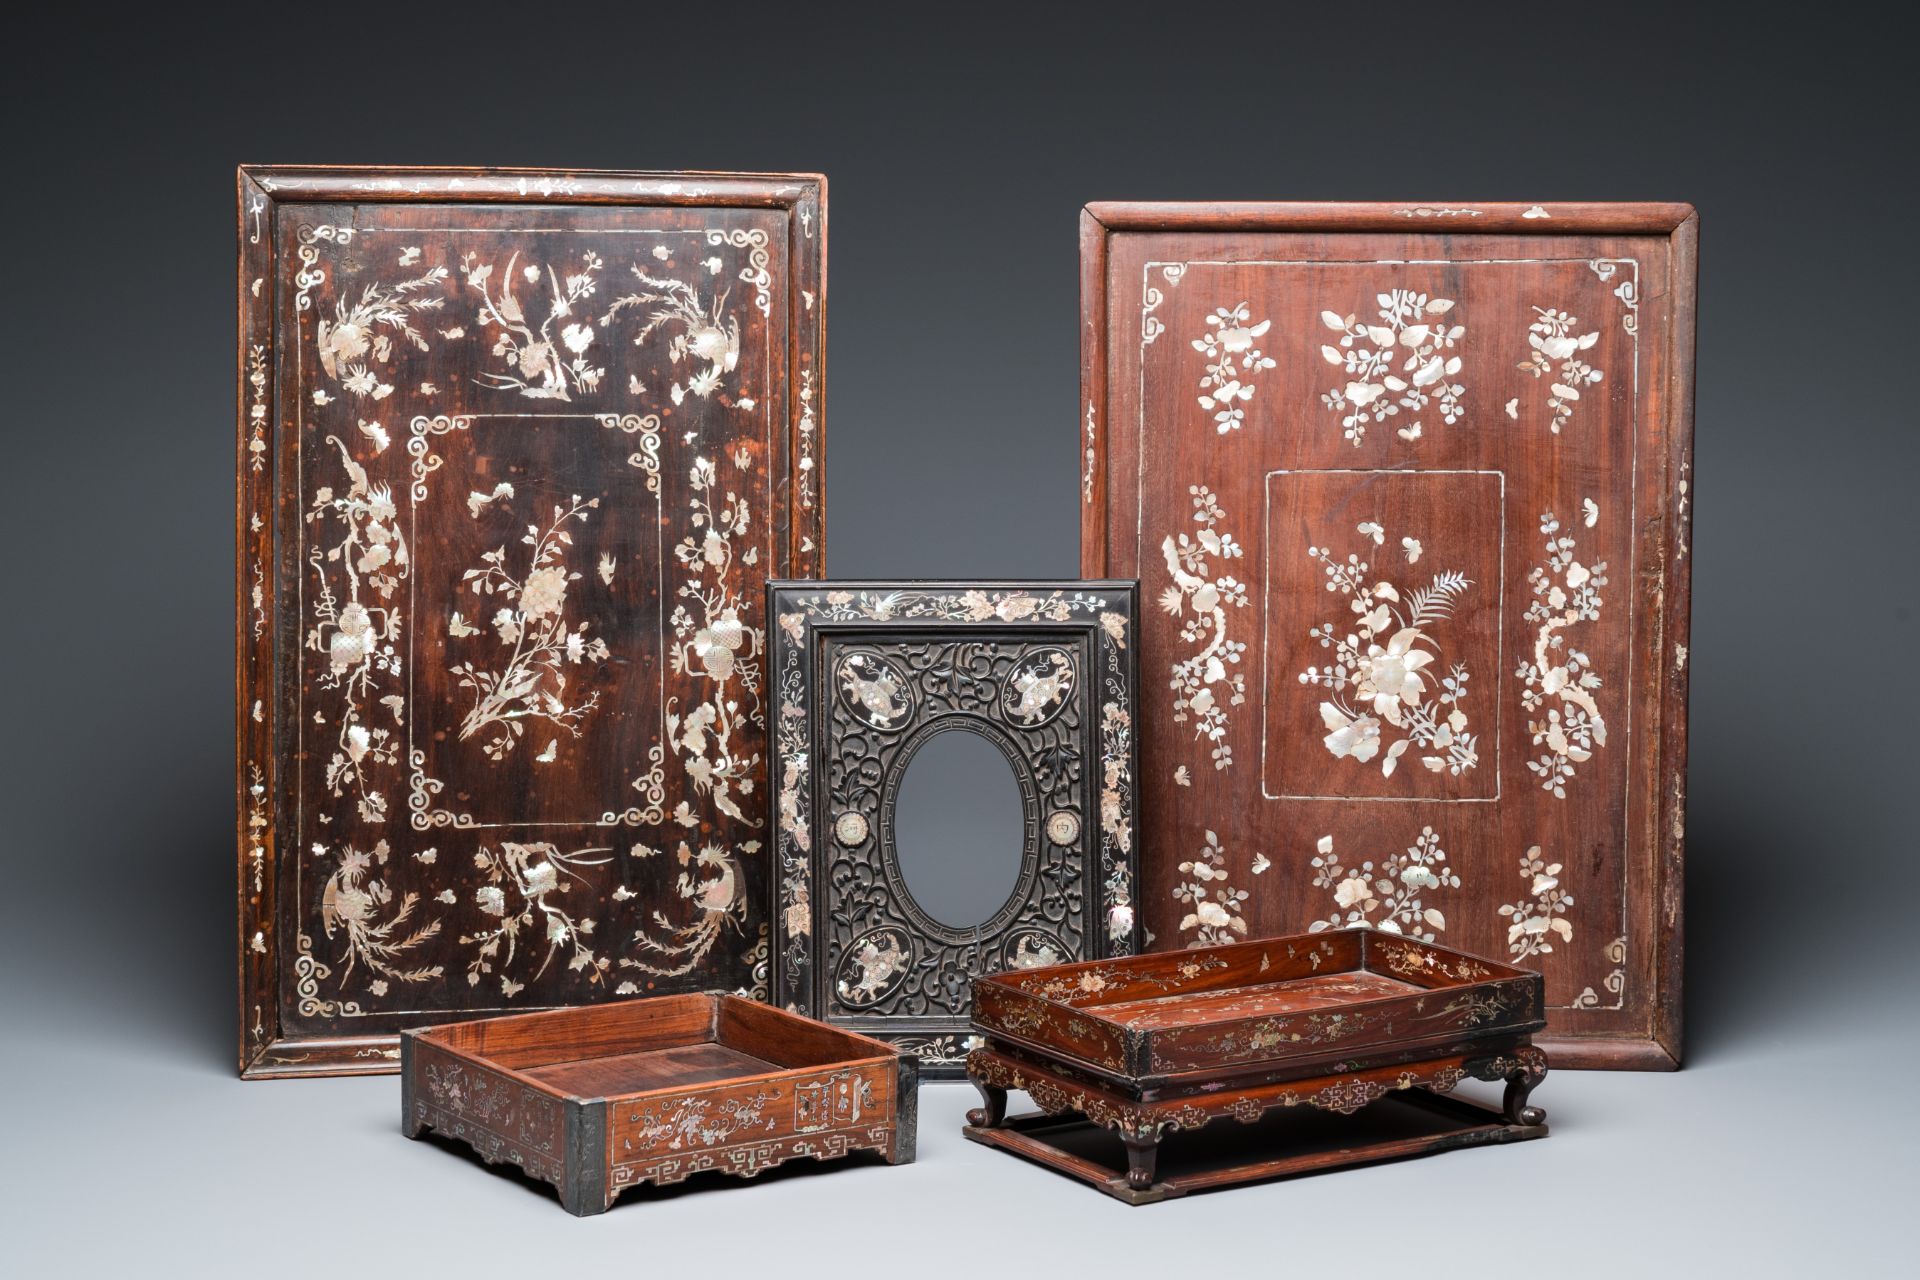 Two mother-of-pearl-inlaid wooden trays, two opium trays and an oval frame, China and/or Vietnam, 19